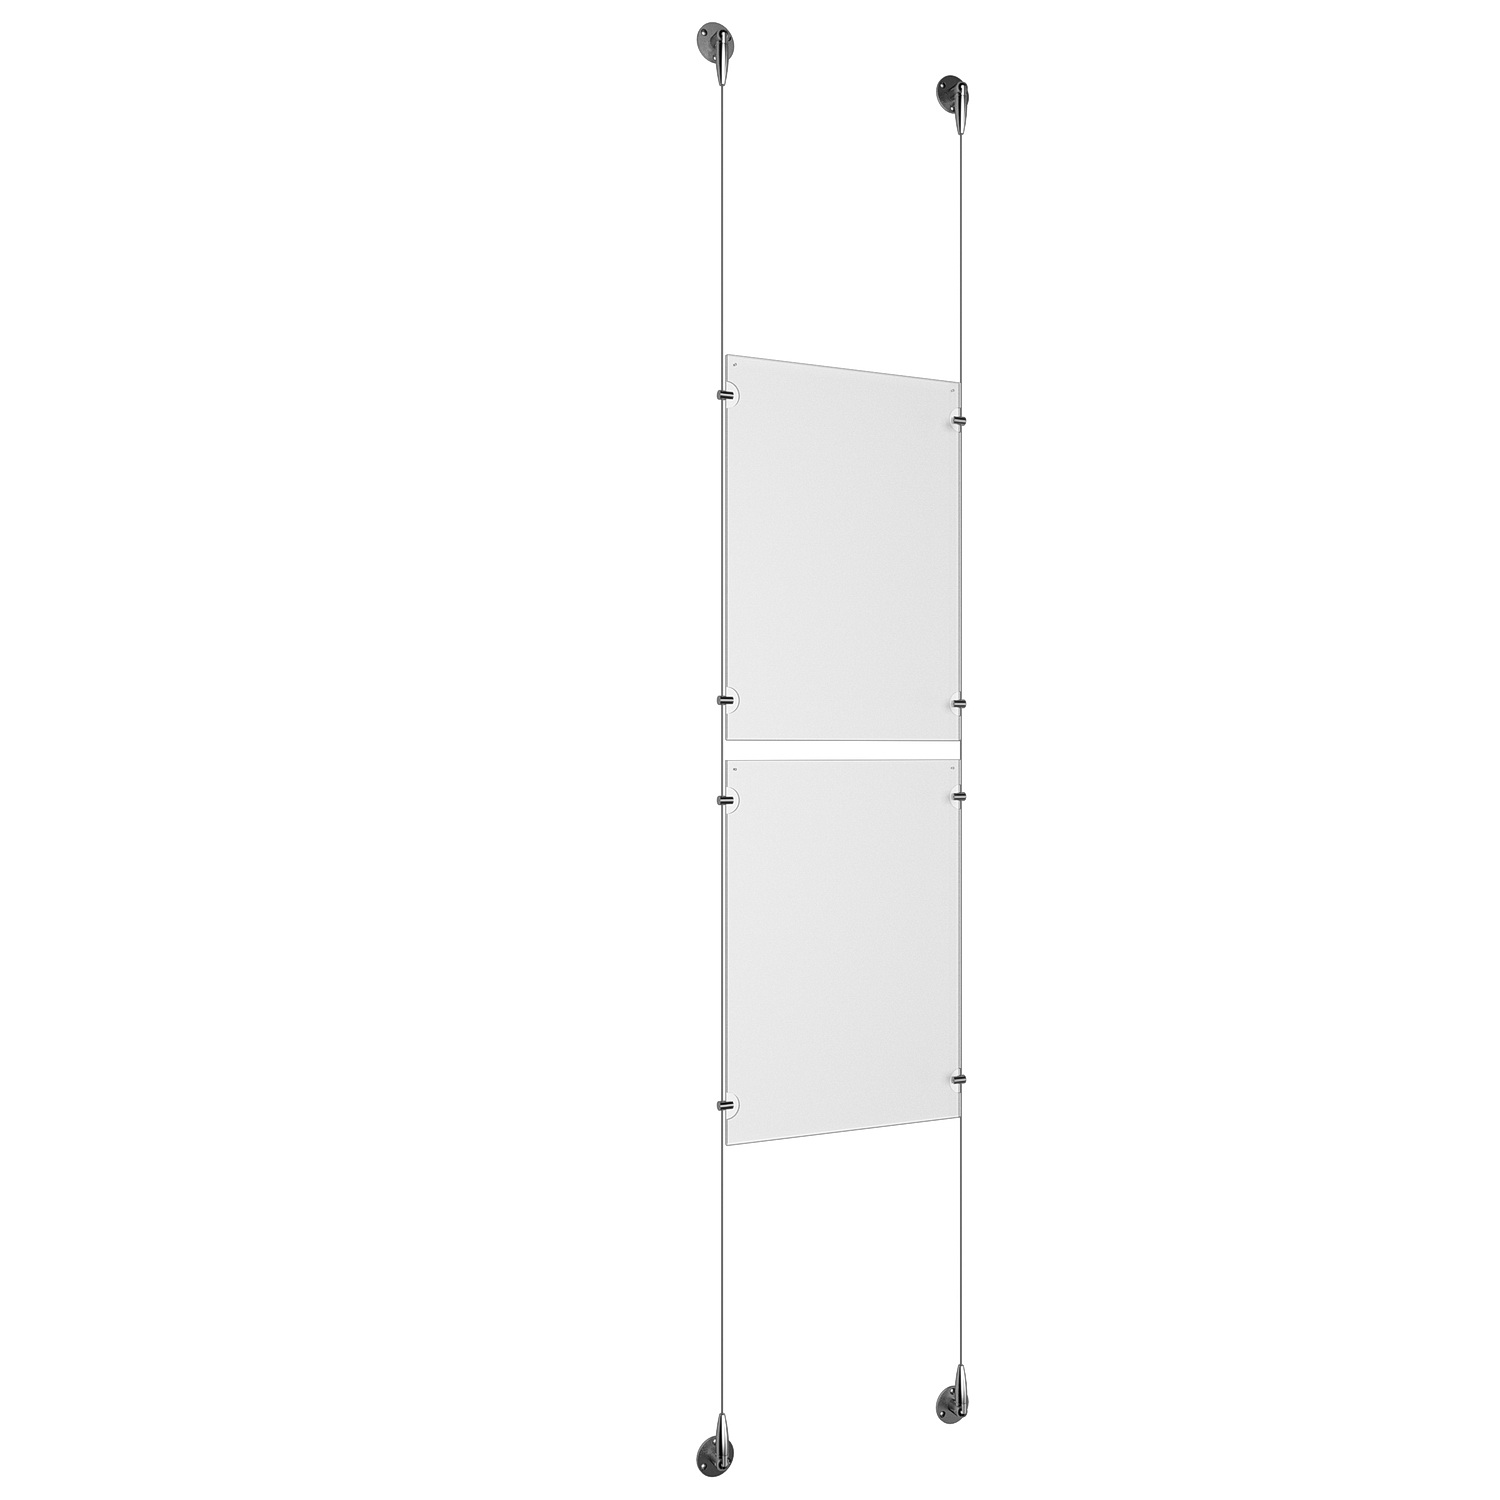 (2) 11'' Width x 17'' Height Clear Acrylic Frame & (2) Aluminum Chrome Polished Adjustable Angle Signature Cable Systems with (8) Single-Sided Panel Grippers